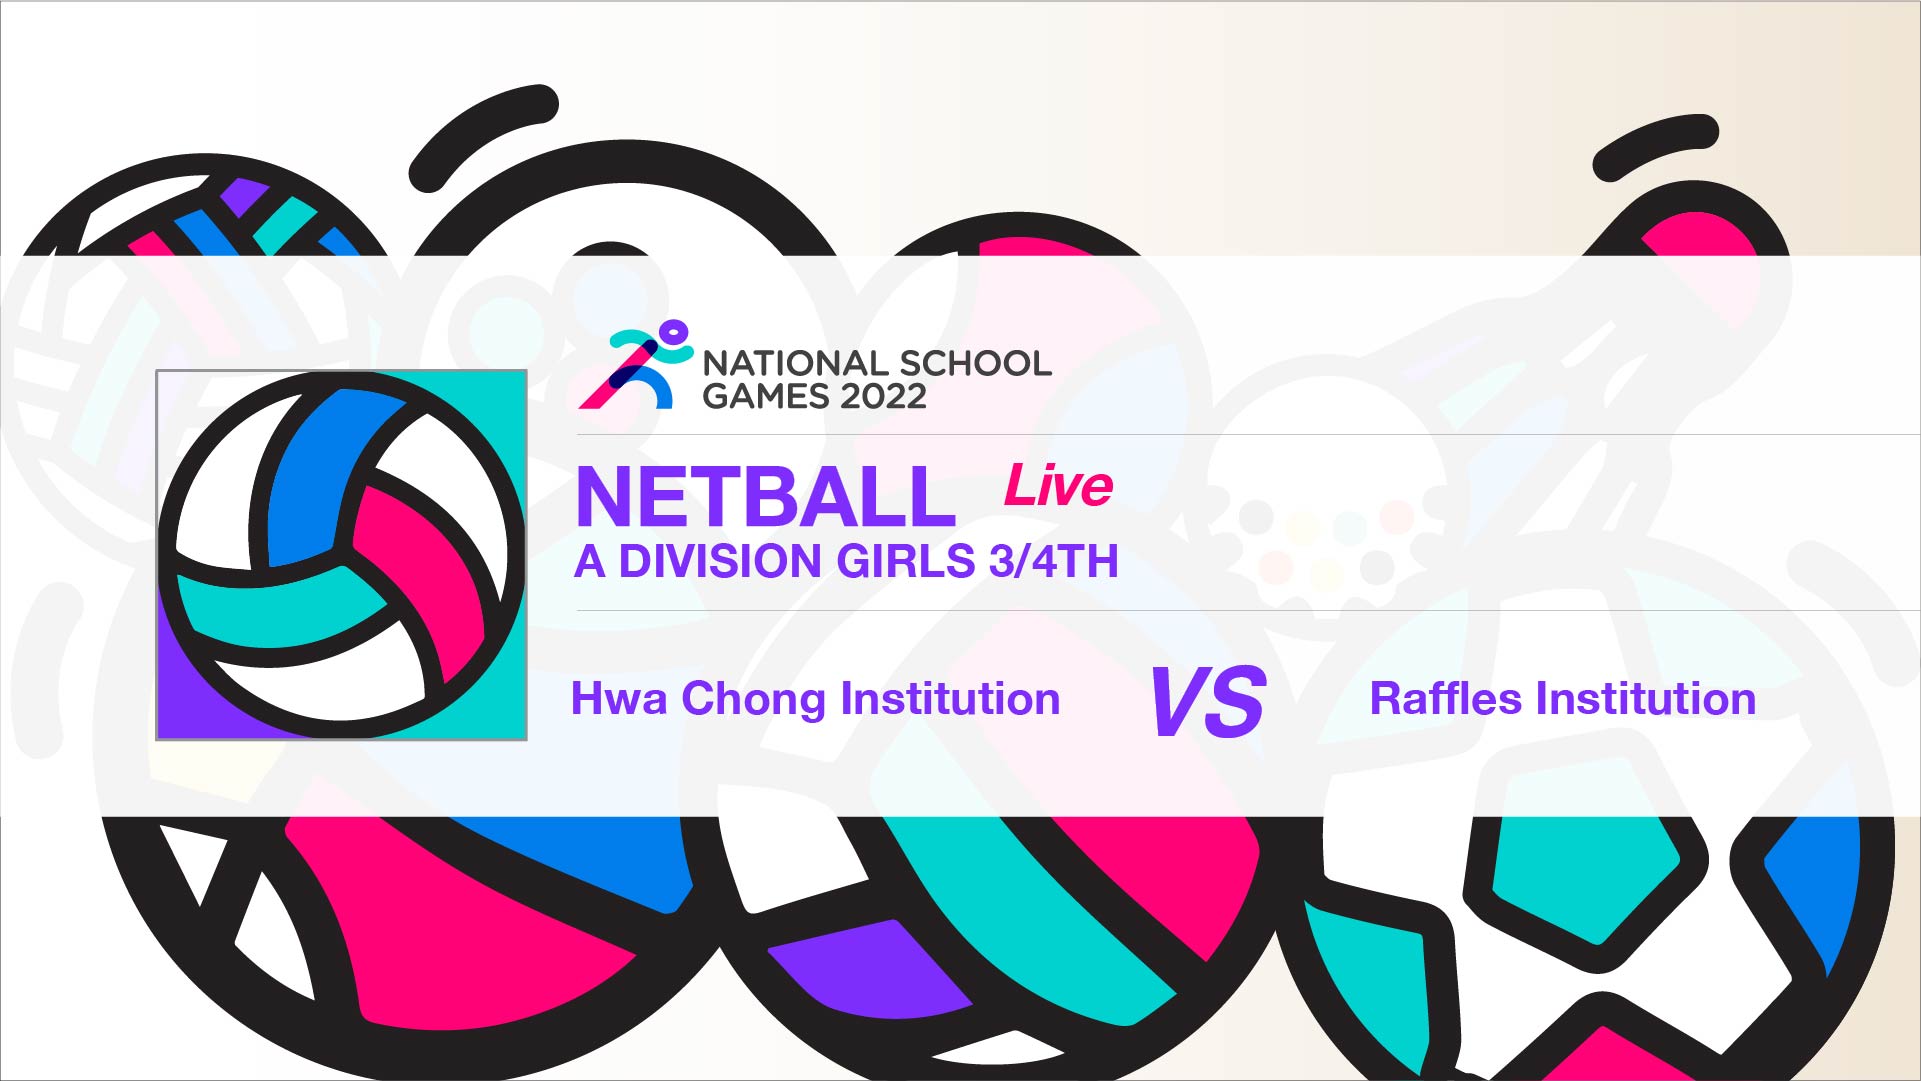 SSSC Netball A Division Girls (3/4th) | Hwa Chong Institution vs Raffles Institution